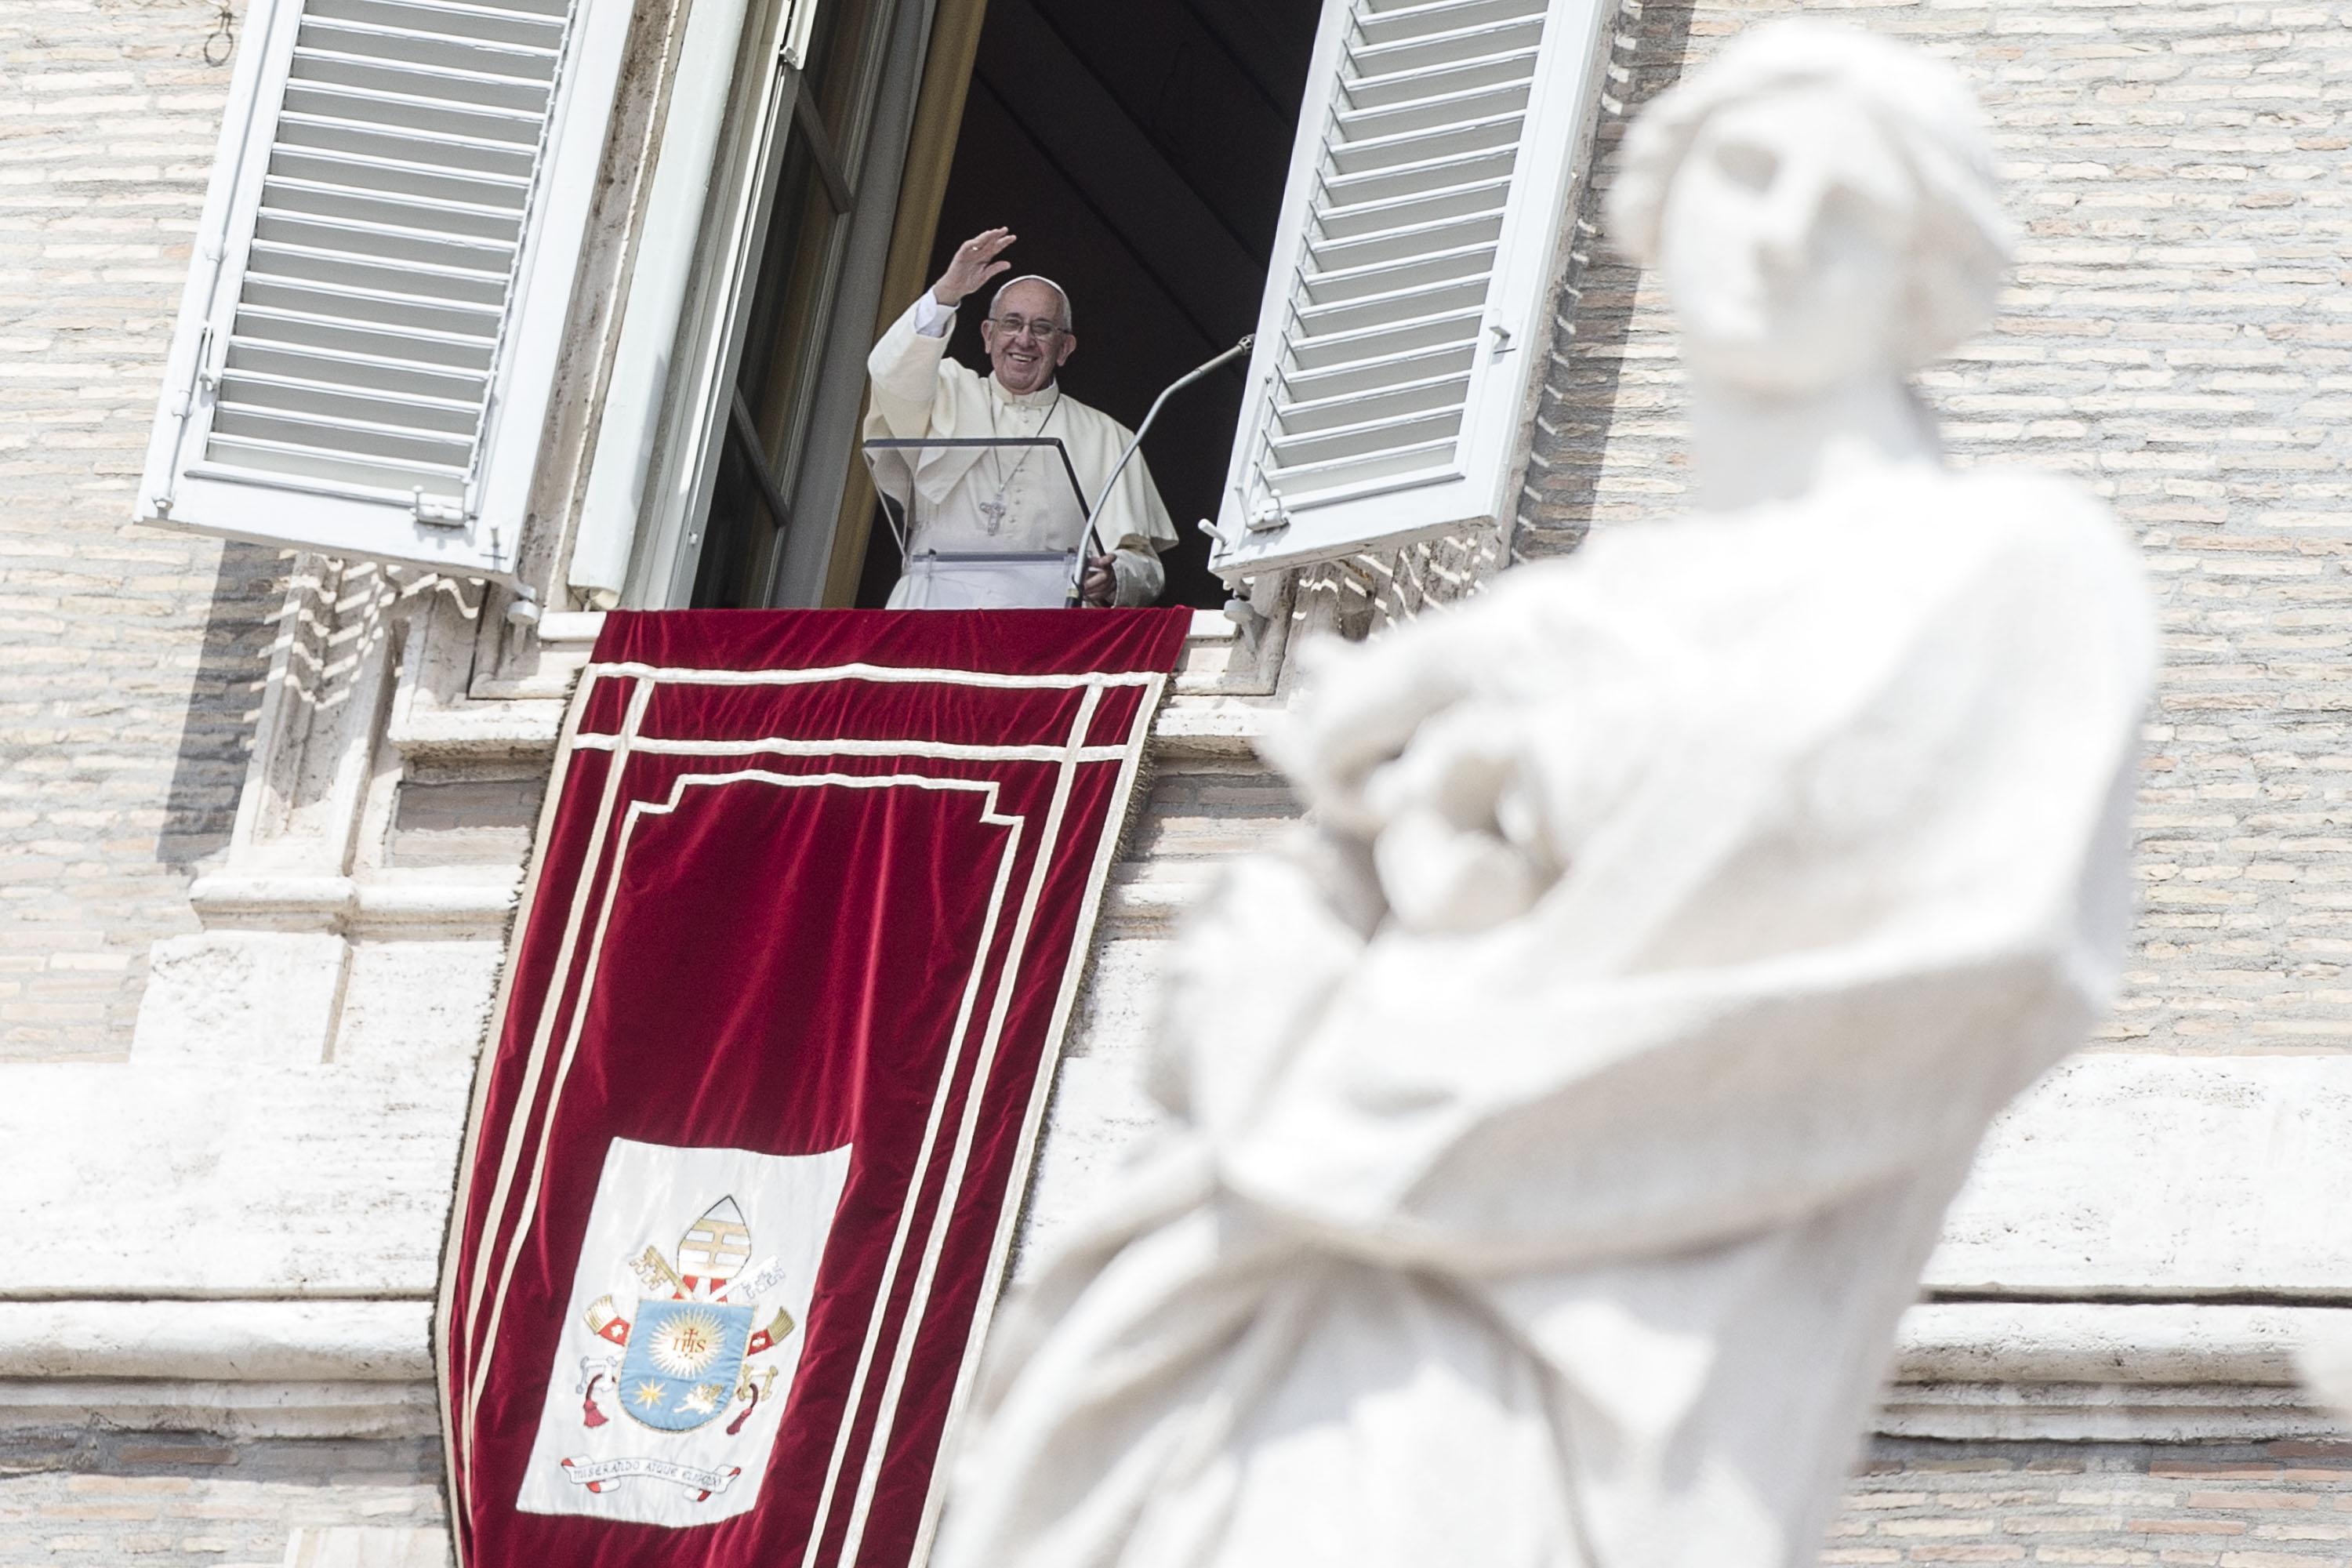 Pope Francis greets faithful during the Angelus prayer in St. Peter's Square